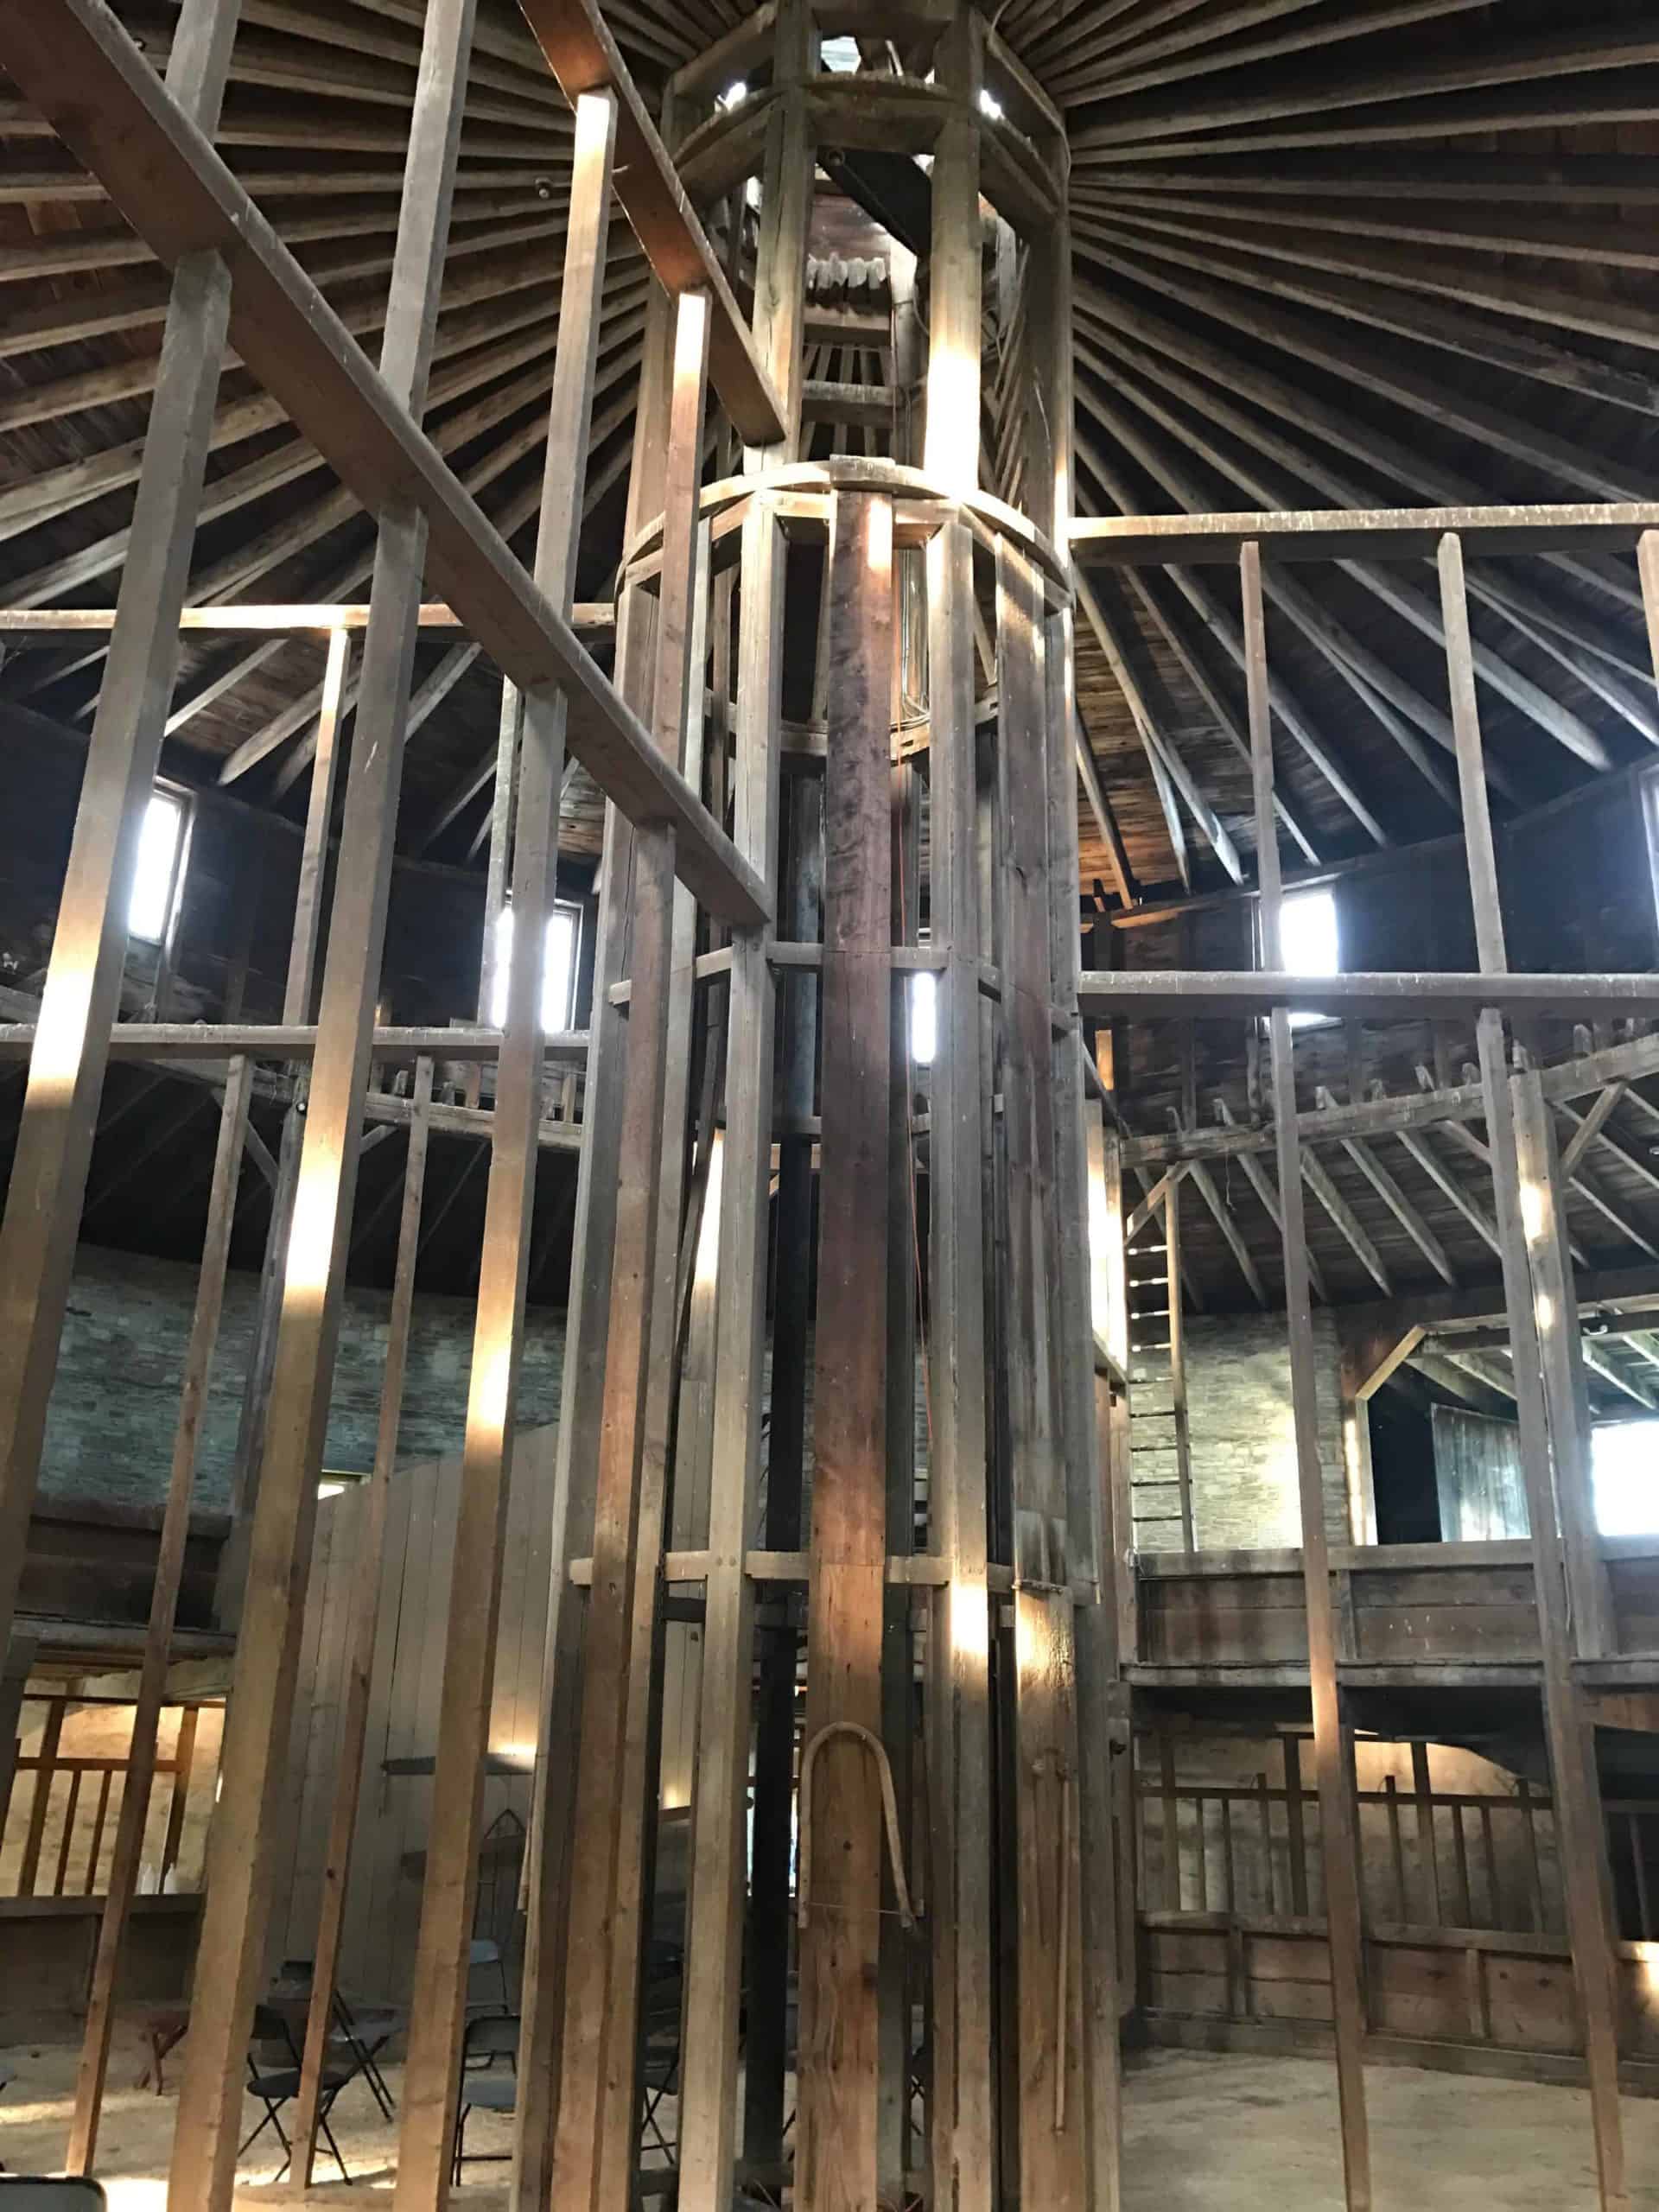 Light falls through the central column of the Round Stone Barn.